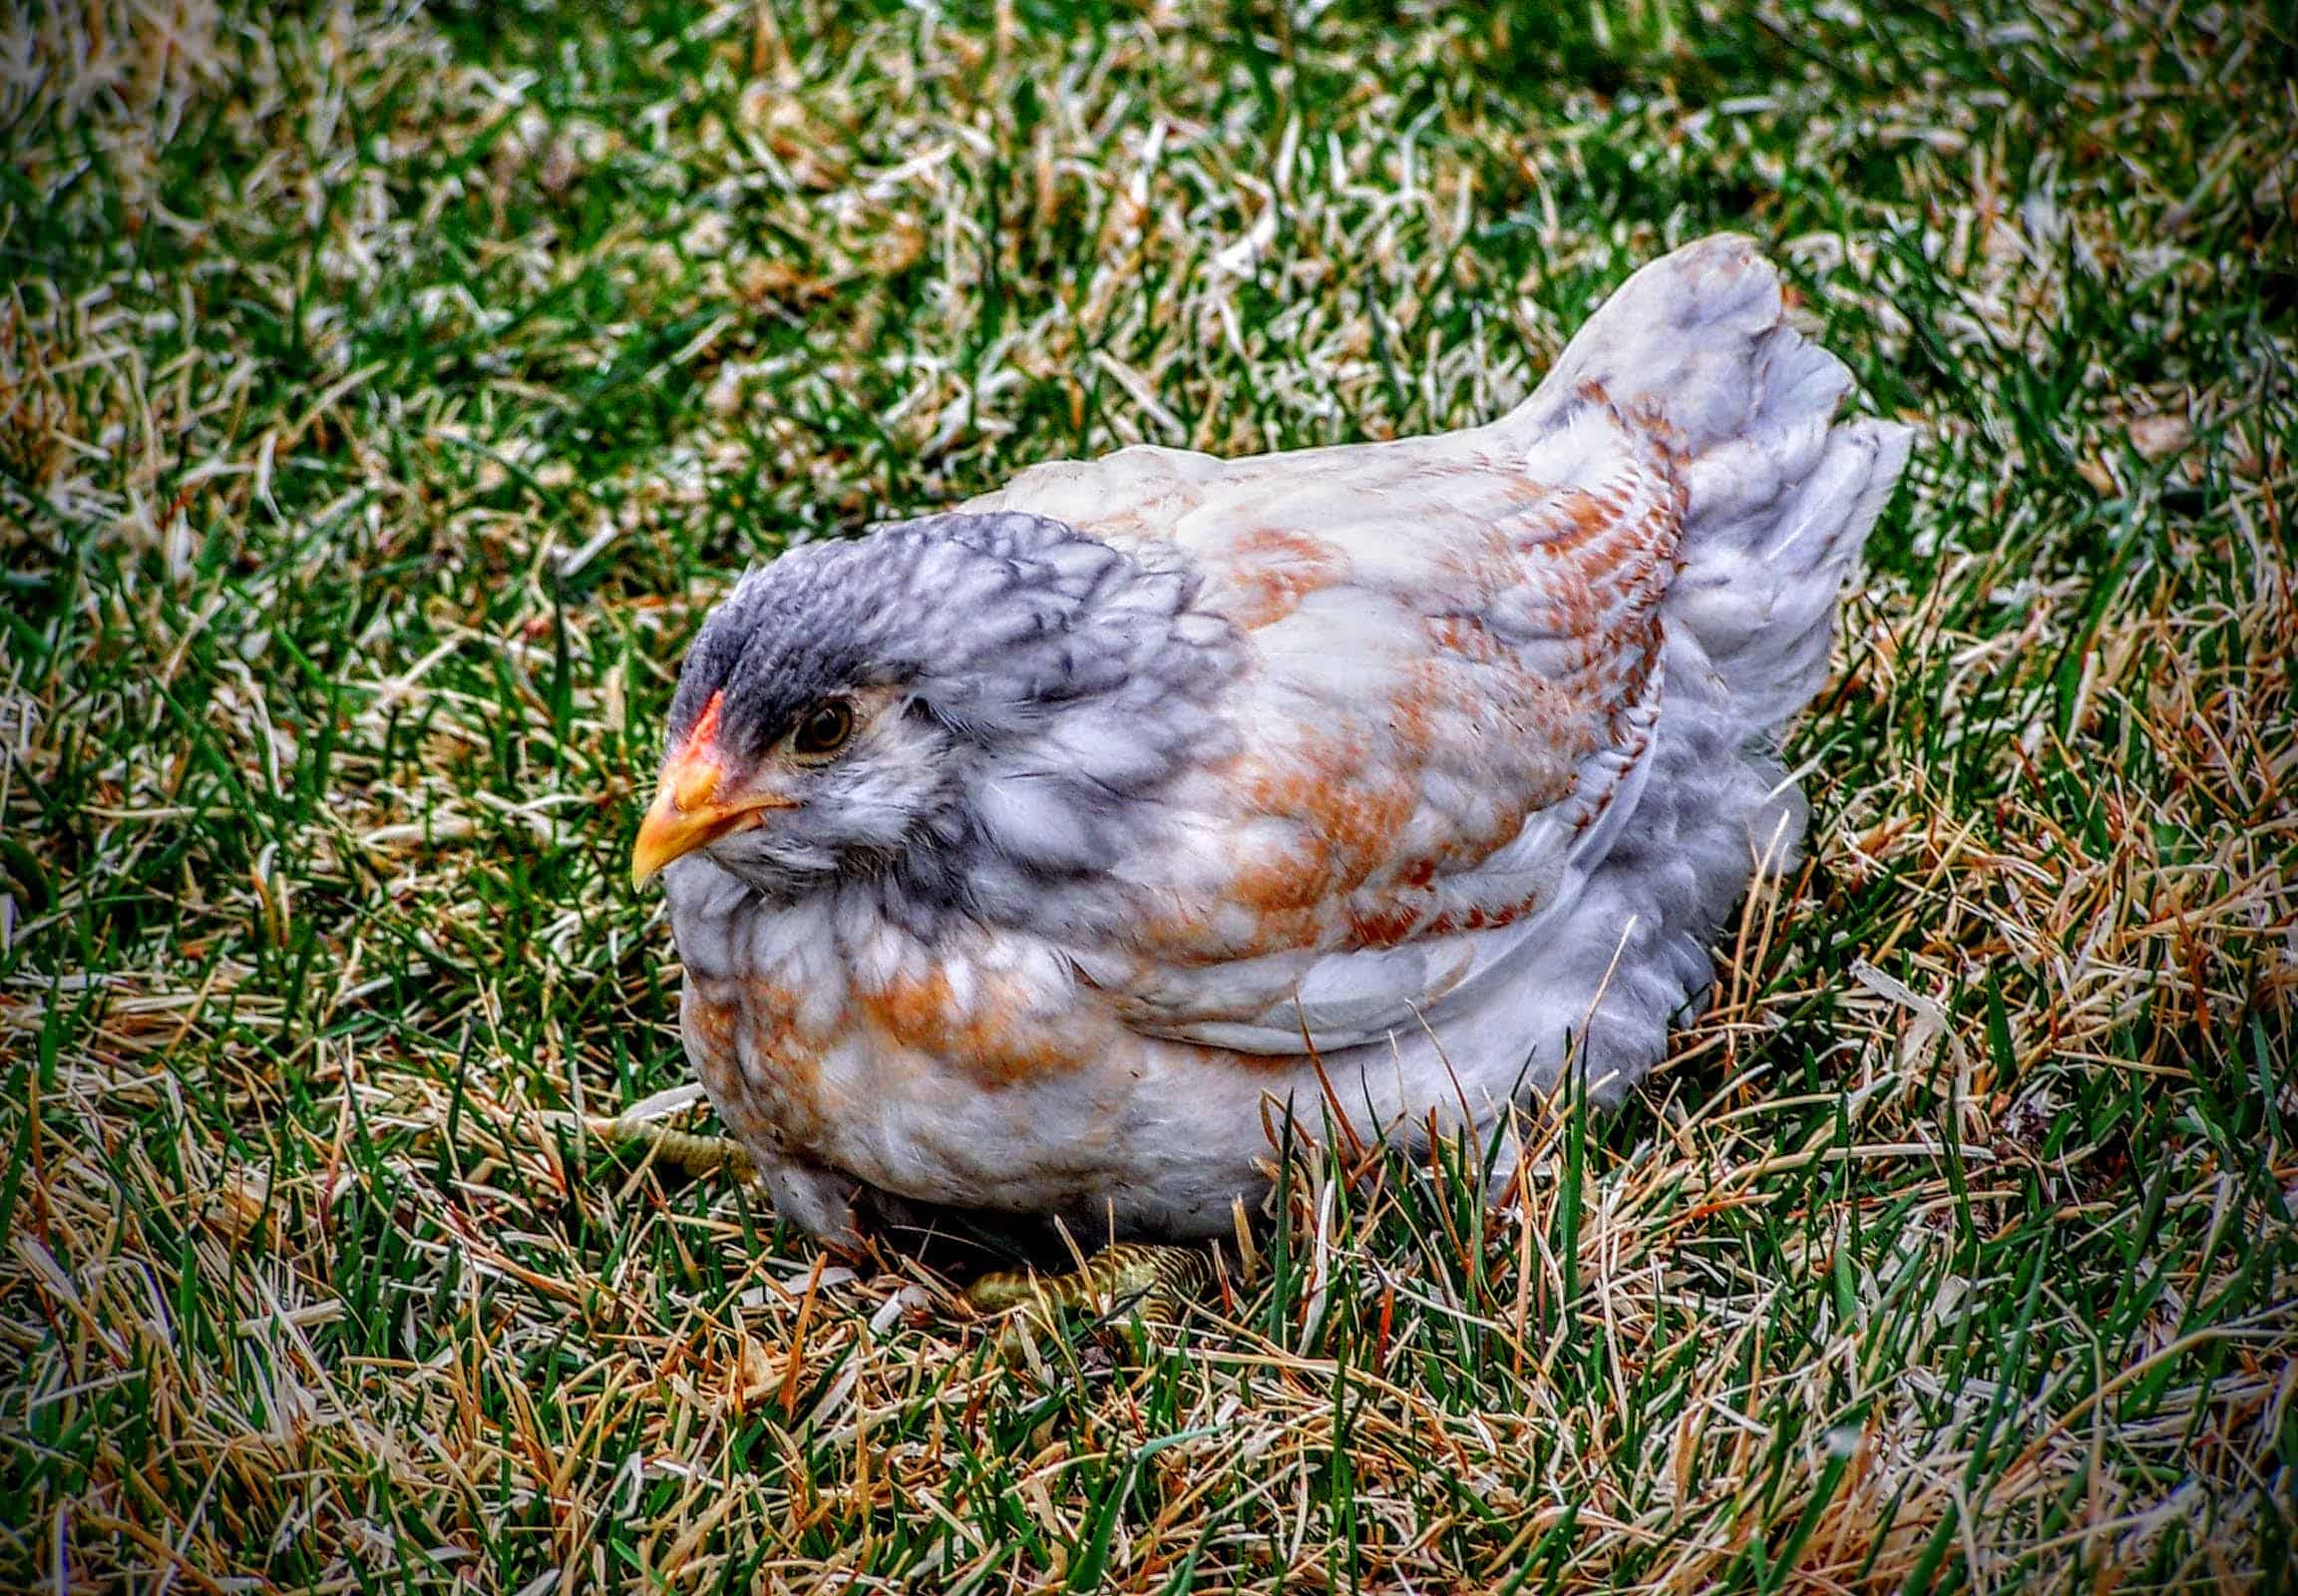 Young Single White, Grey and Brown chicken hen on grass lawn close up in South Jordan Utah USA